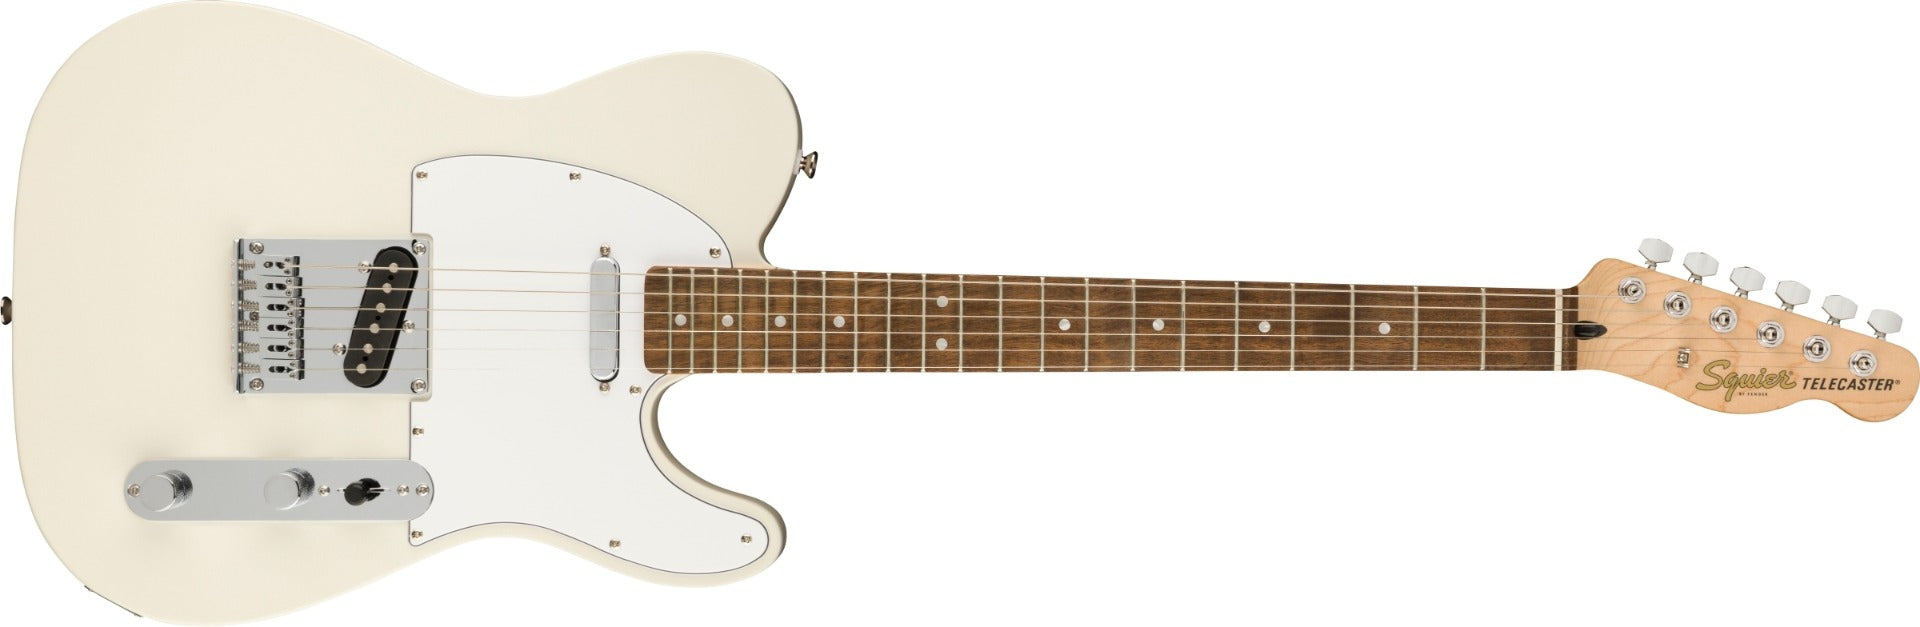 Squier Affinity Telecaster - Laurel, Olympic White View 2